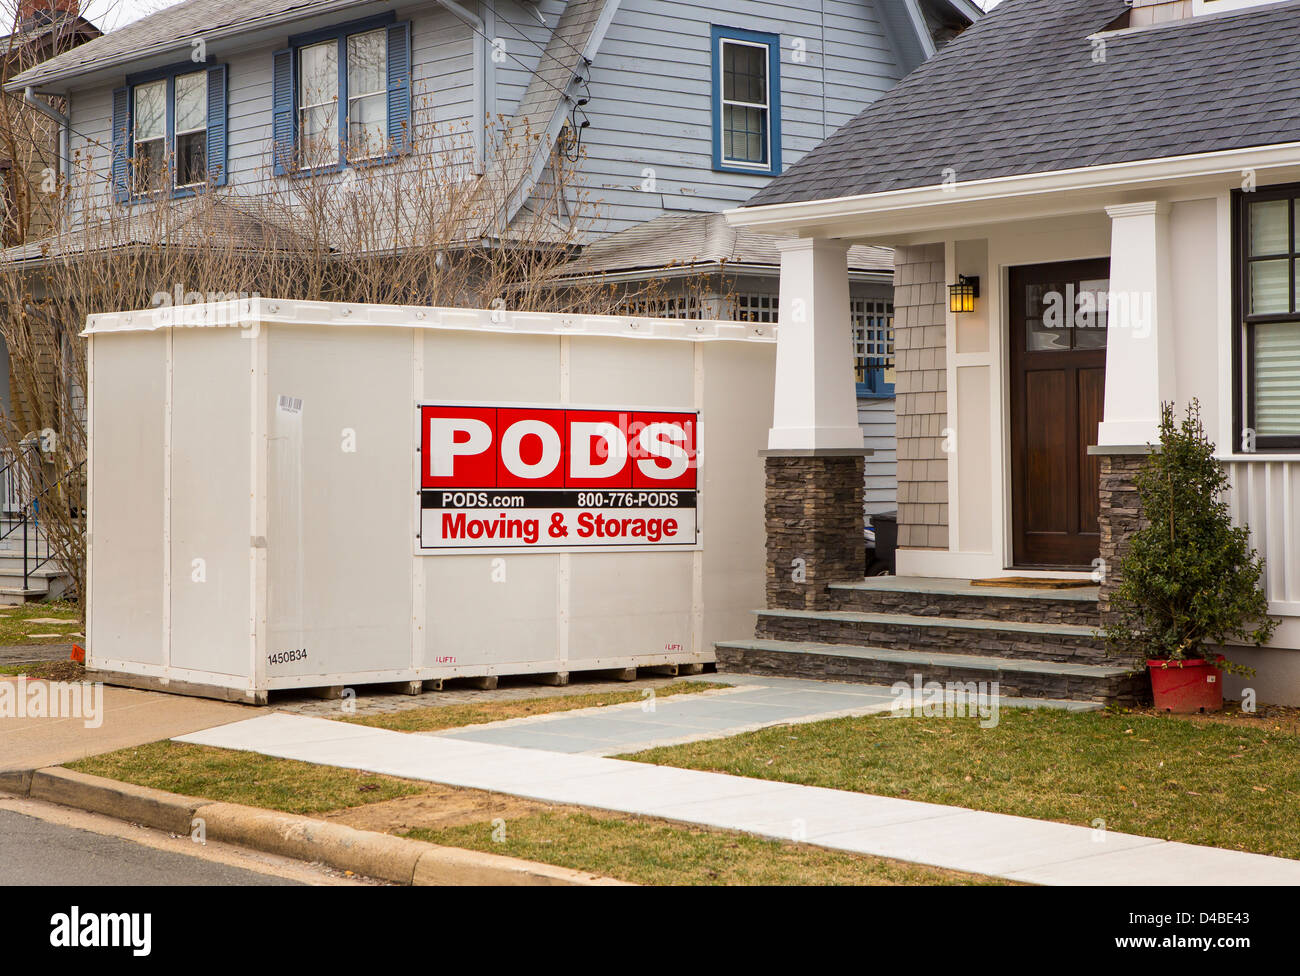 ARLINGTON, VIRGINIA, USA - PODS storage container in front of houses. Stock Photo